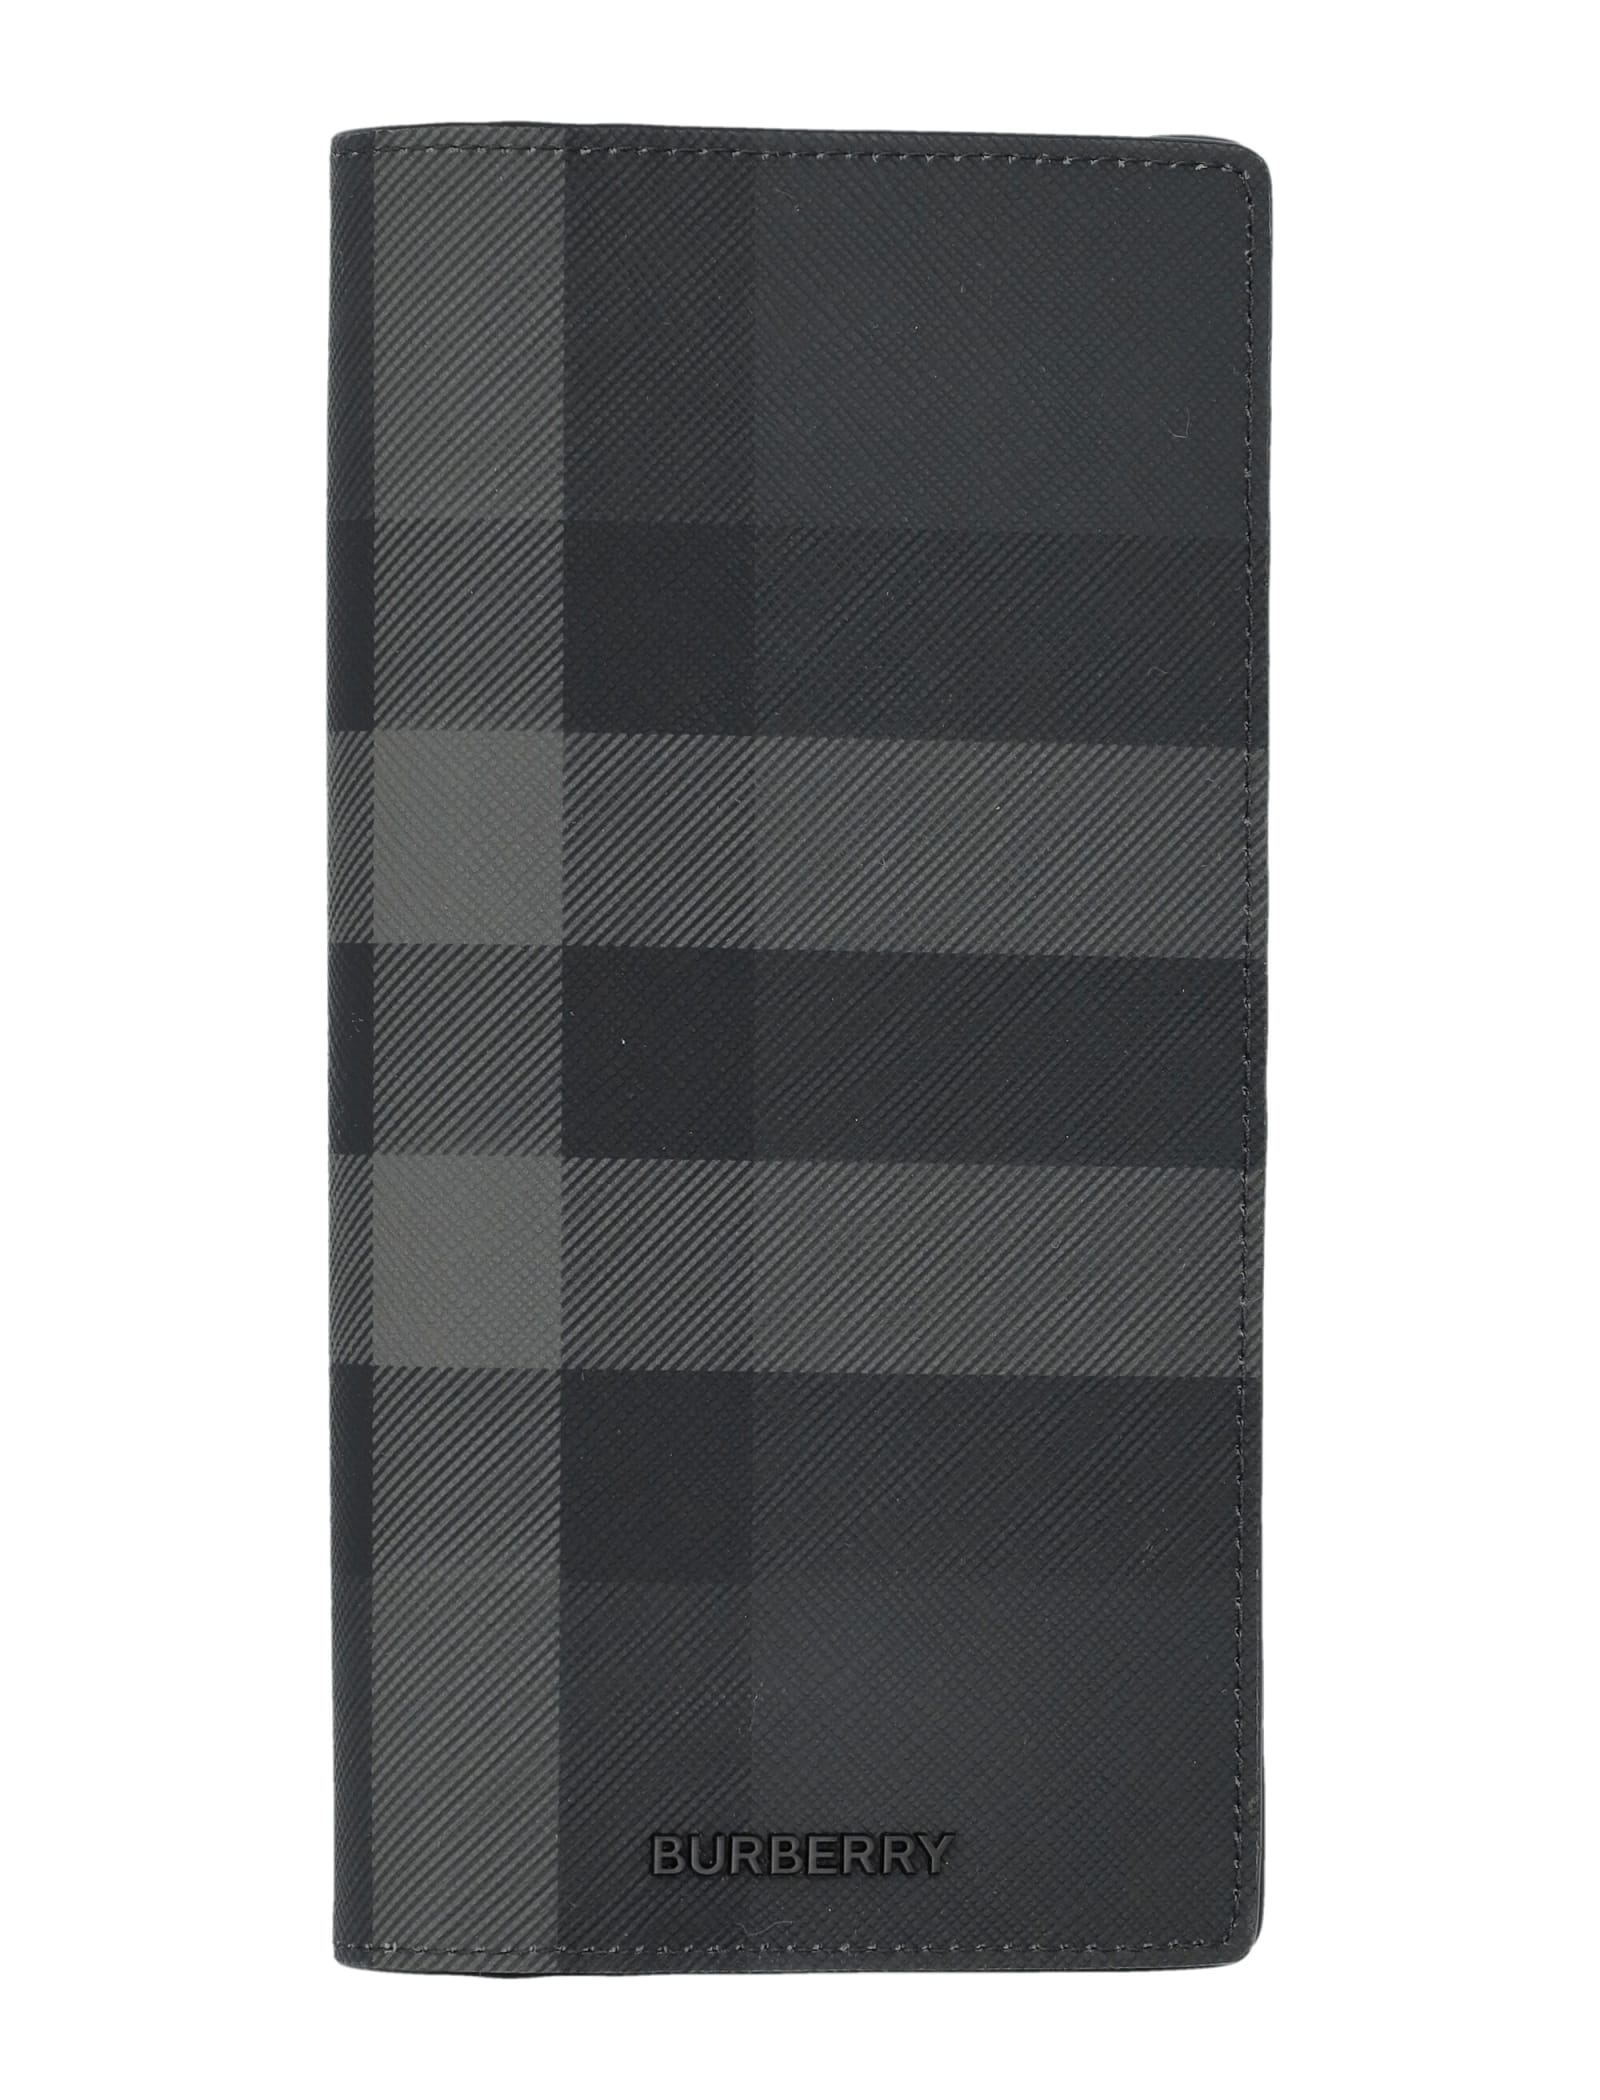 Burberry Check Continental Wallet In Charcoal